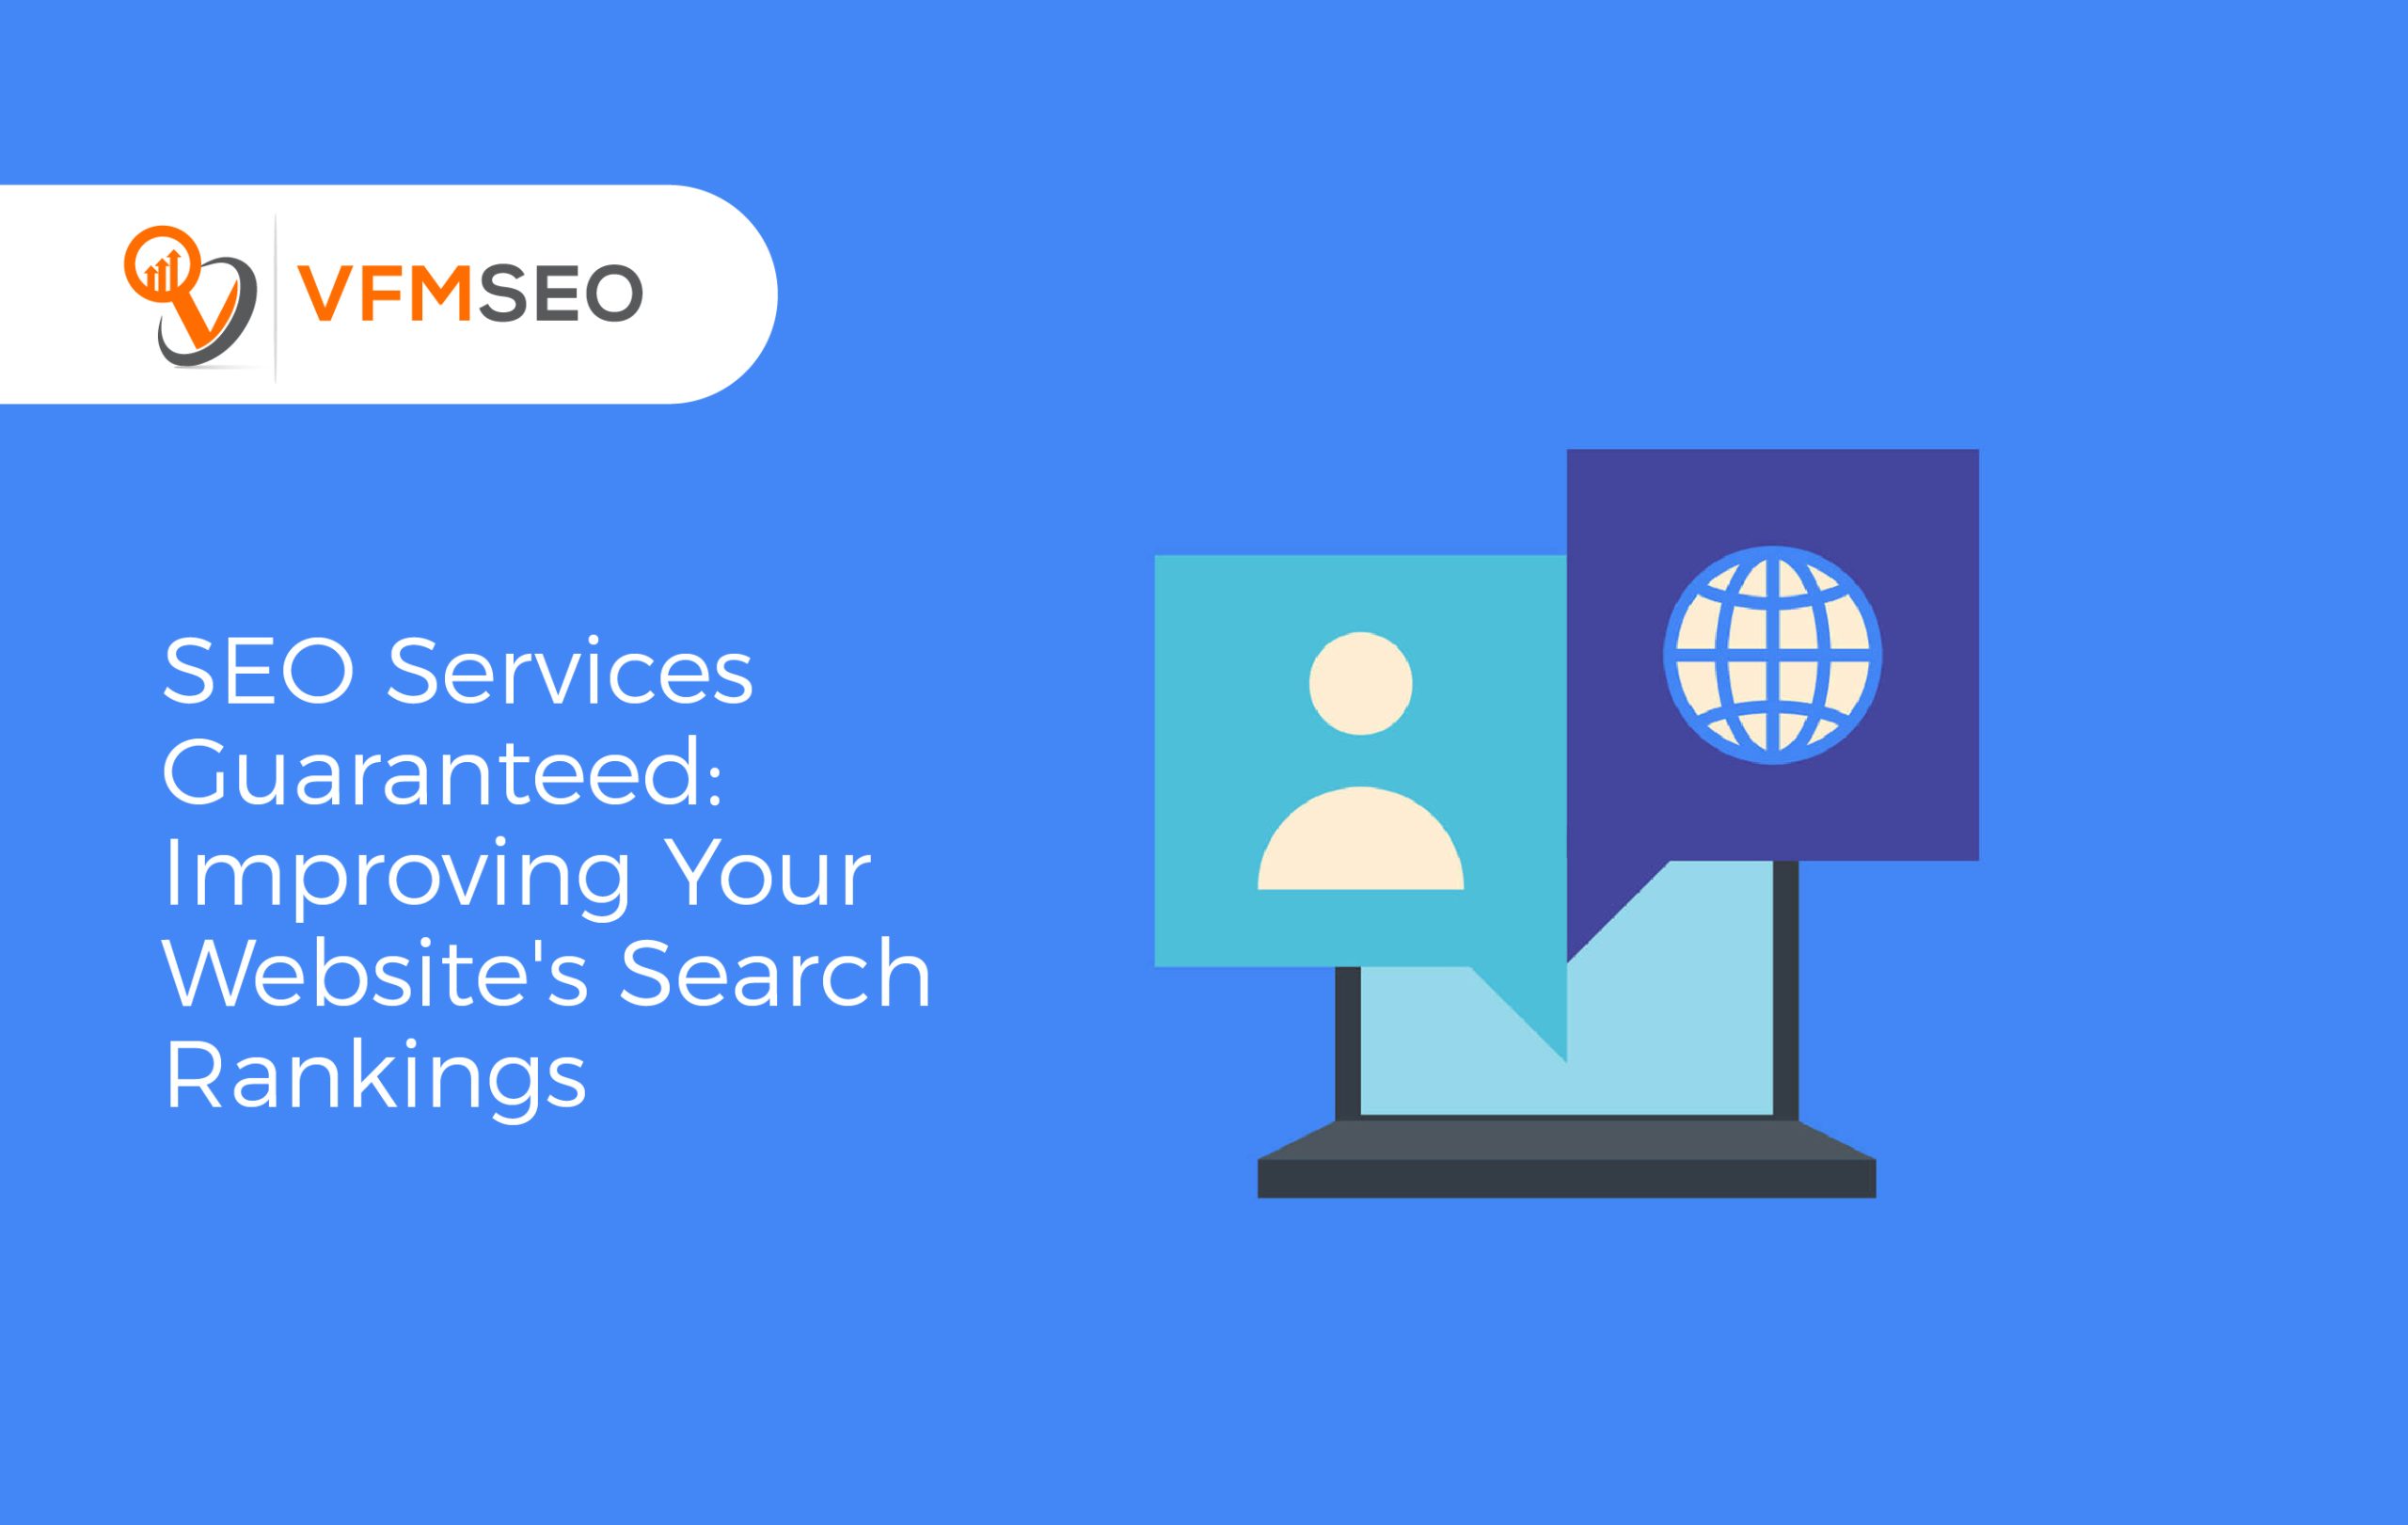 SEO Services Guaranteed Improving Your Websites Search Rankings